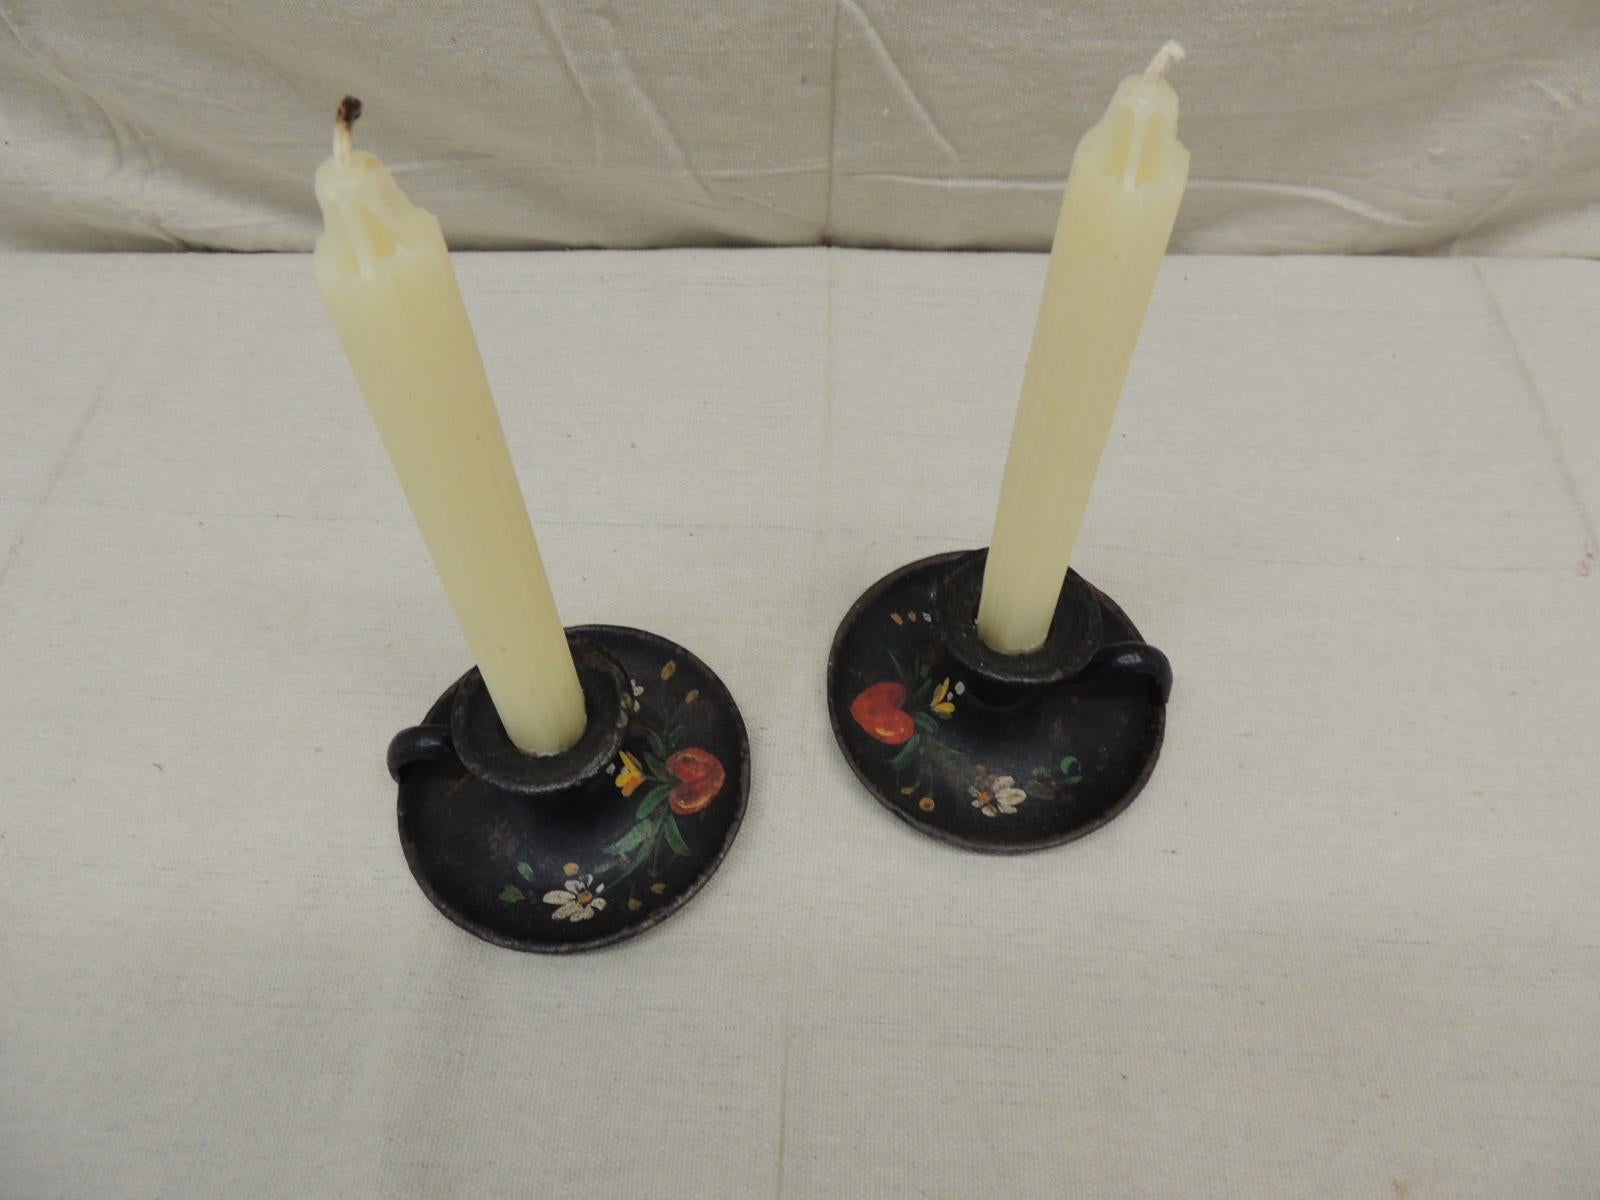 Pair of vintage iron hand painted candleholders.
Round Folk Art candleholders painted with hearts and flowers.
Size: 4